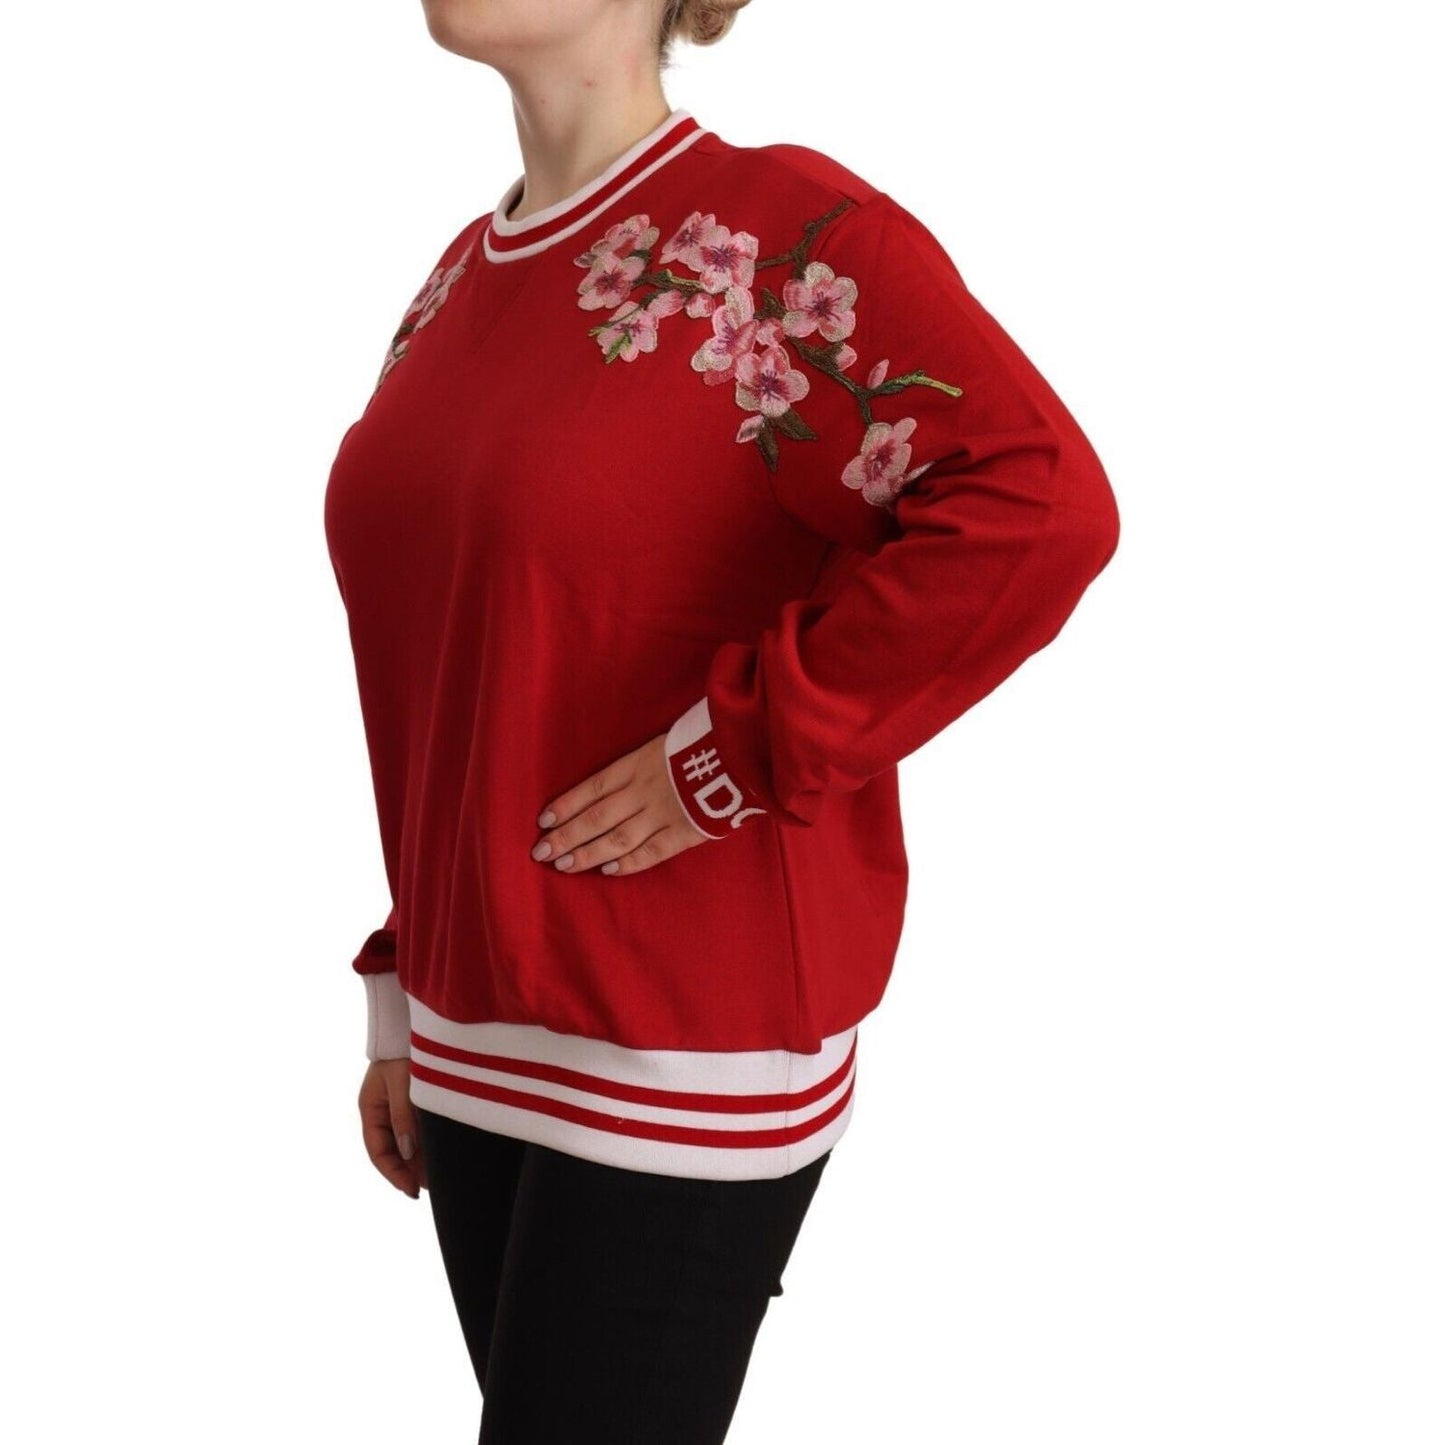 Dolce & Gabbana Elegant Red Crewneck Pullover with Floral Motif red-cotton-crewneck-dglove-pullover-sweater WOMAN SWEATERS